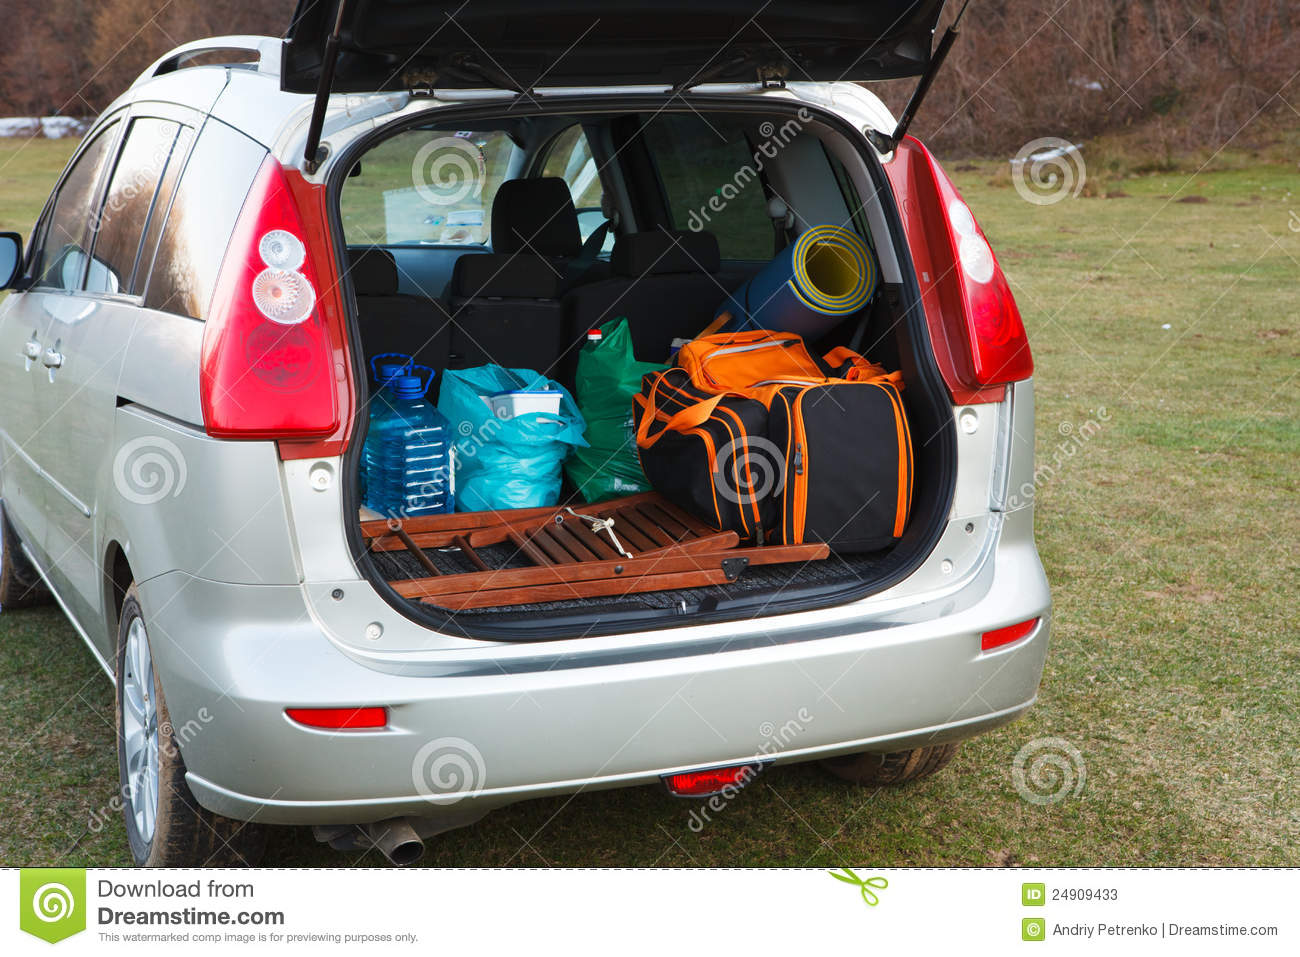 Car Loaded With Open Trunk And Luggage Stock Photos   Image  24909433